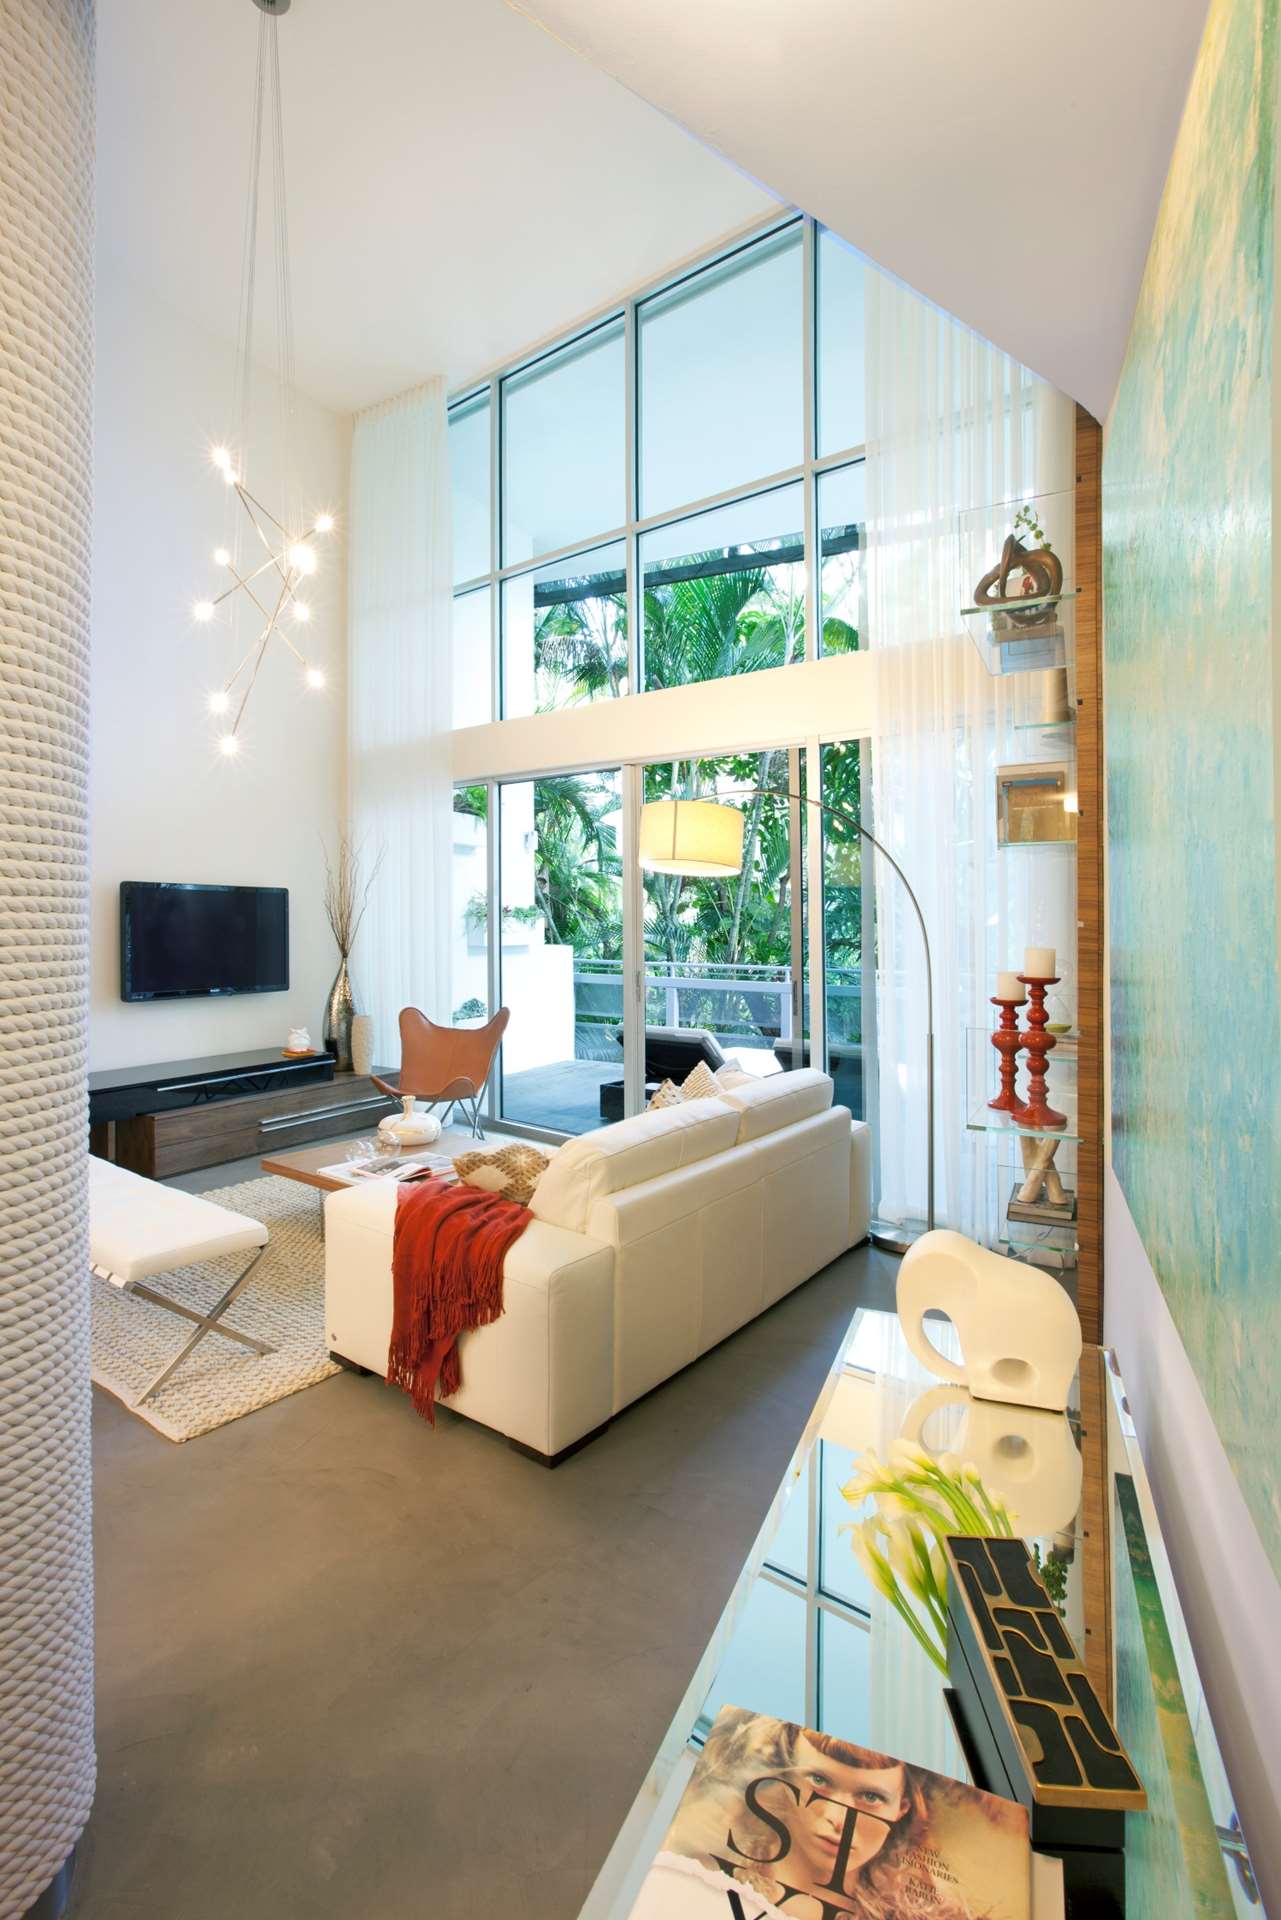 South Beach Chic Interiors By Dkor